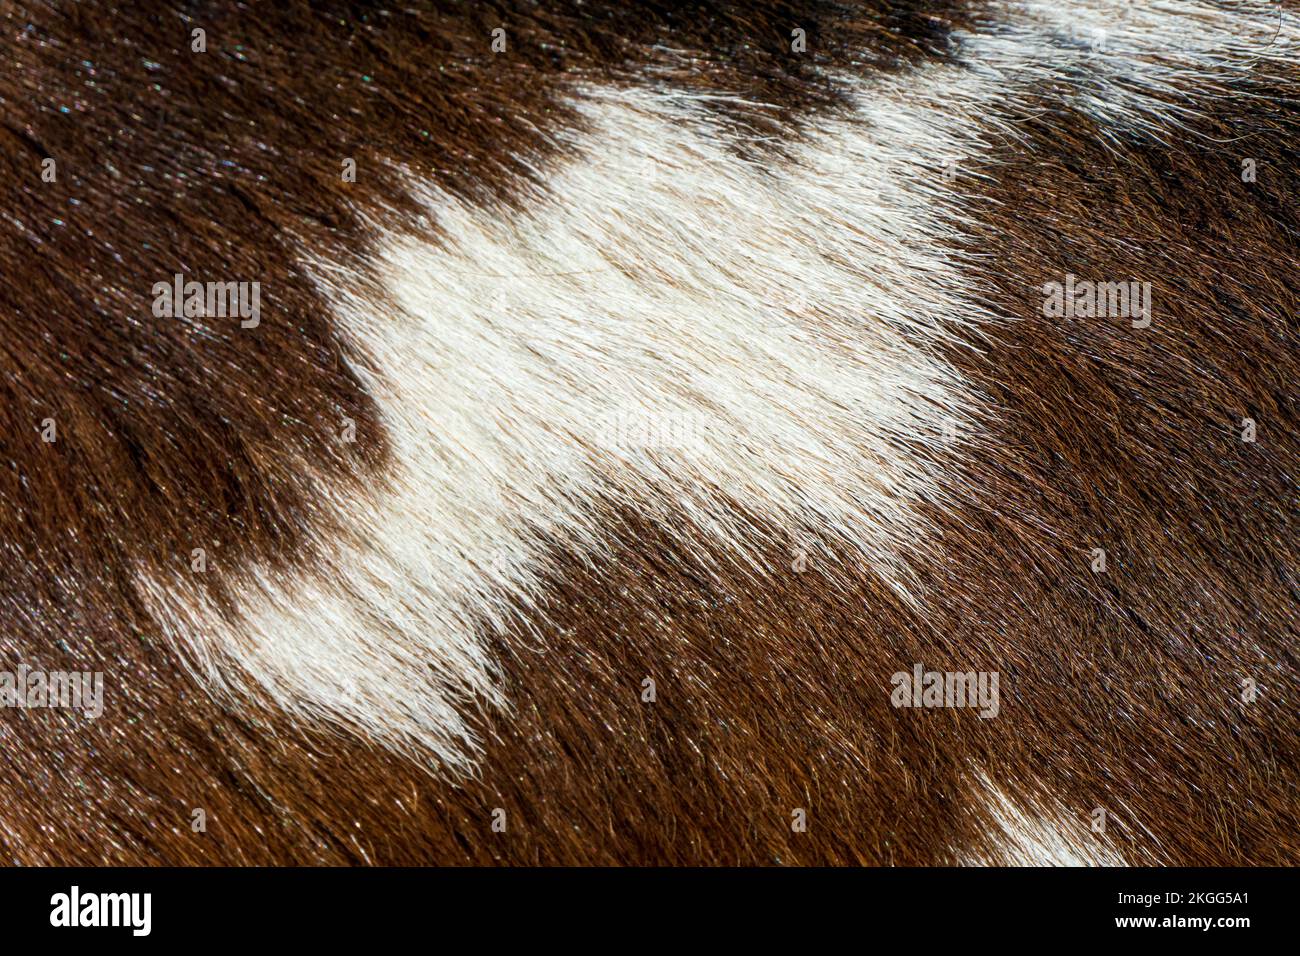 Brown with white spots fur close up Stock Photo